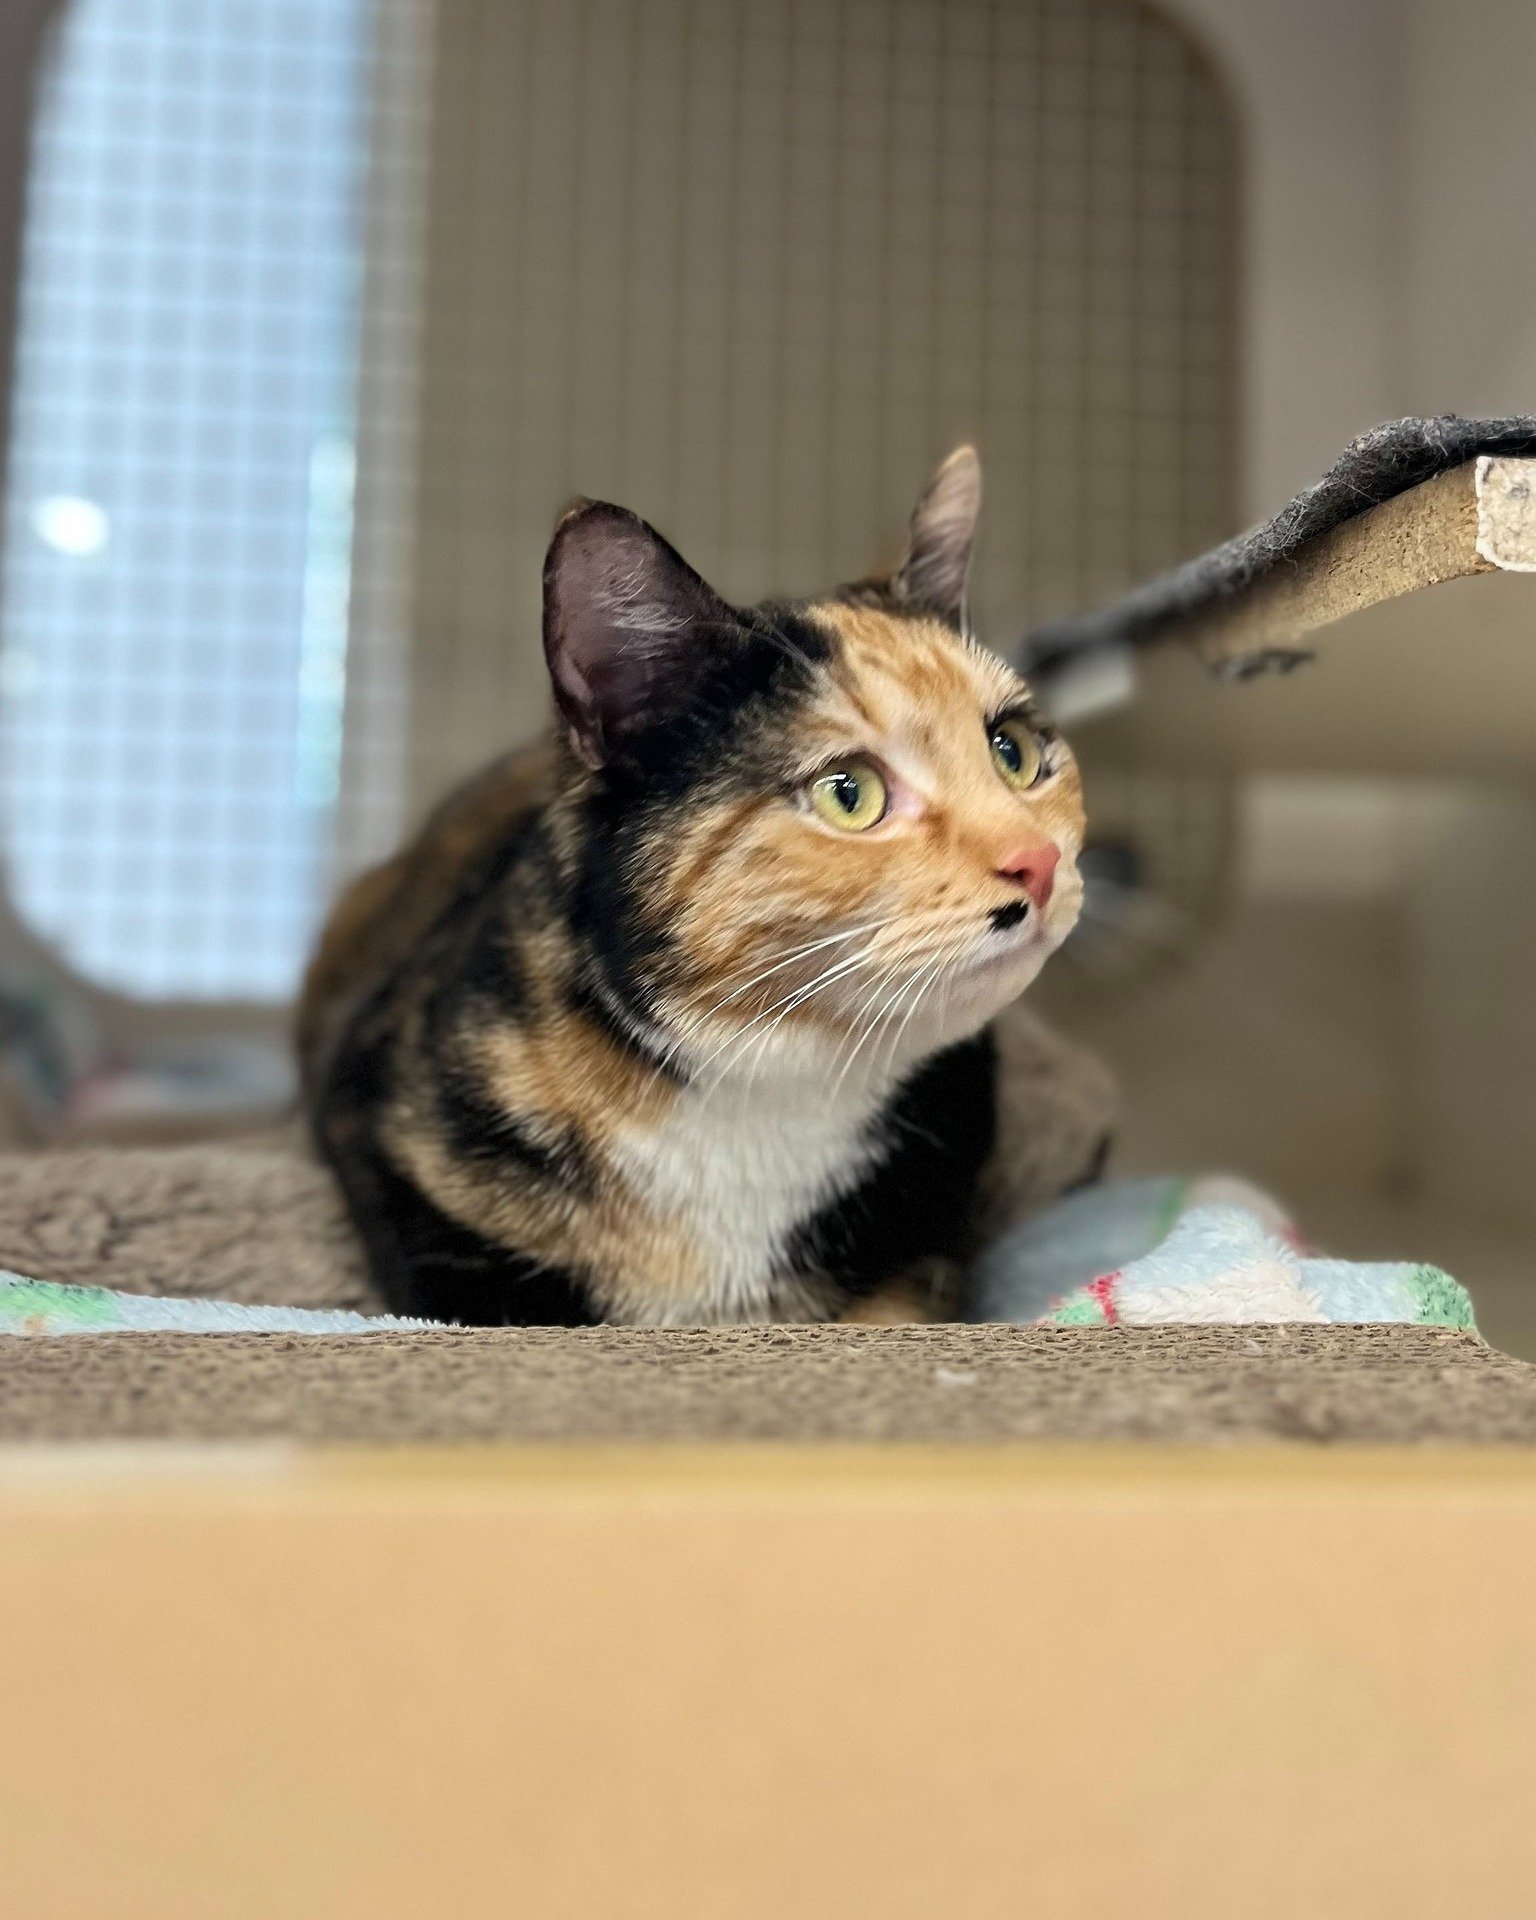 Meet Callie, a sweet and affectionate feline formerly known as Quinn during her stay at the shelter. Now at Petco in Walla Walla, Callie is ready to find her forever home. Despite her return due to her owner's illness, Callie loves people and is happ